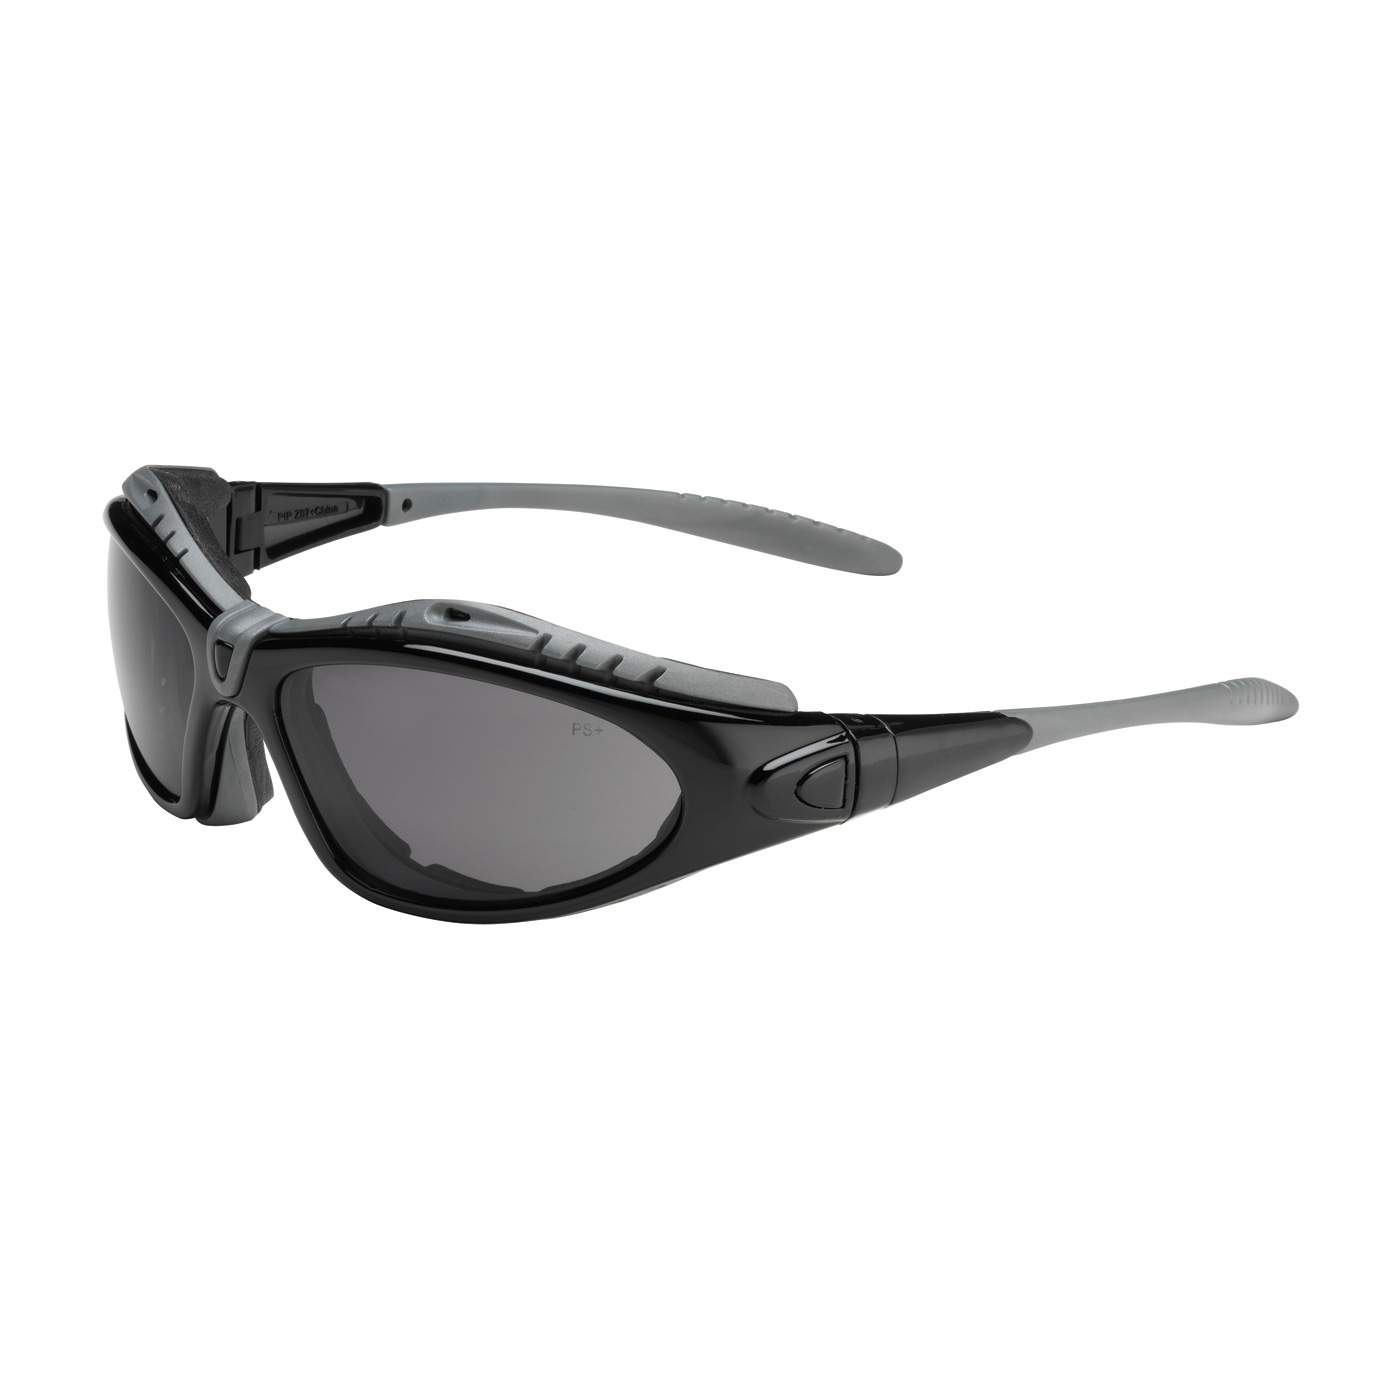 Bouton Fuselage Tinted Interchangeable Temple Safety Glasses from Columbia Safety